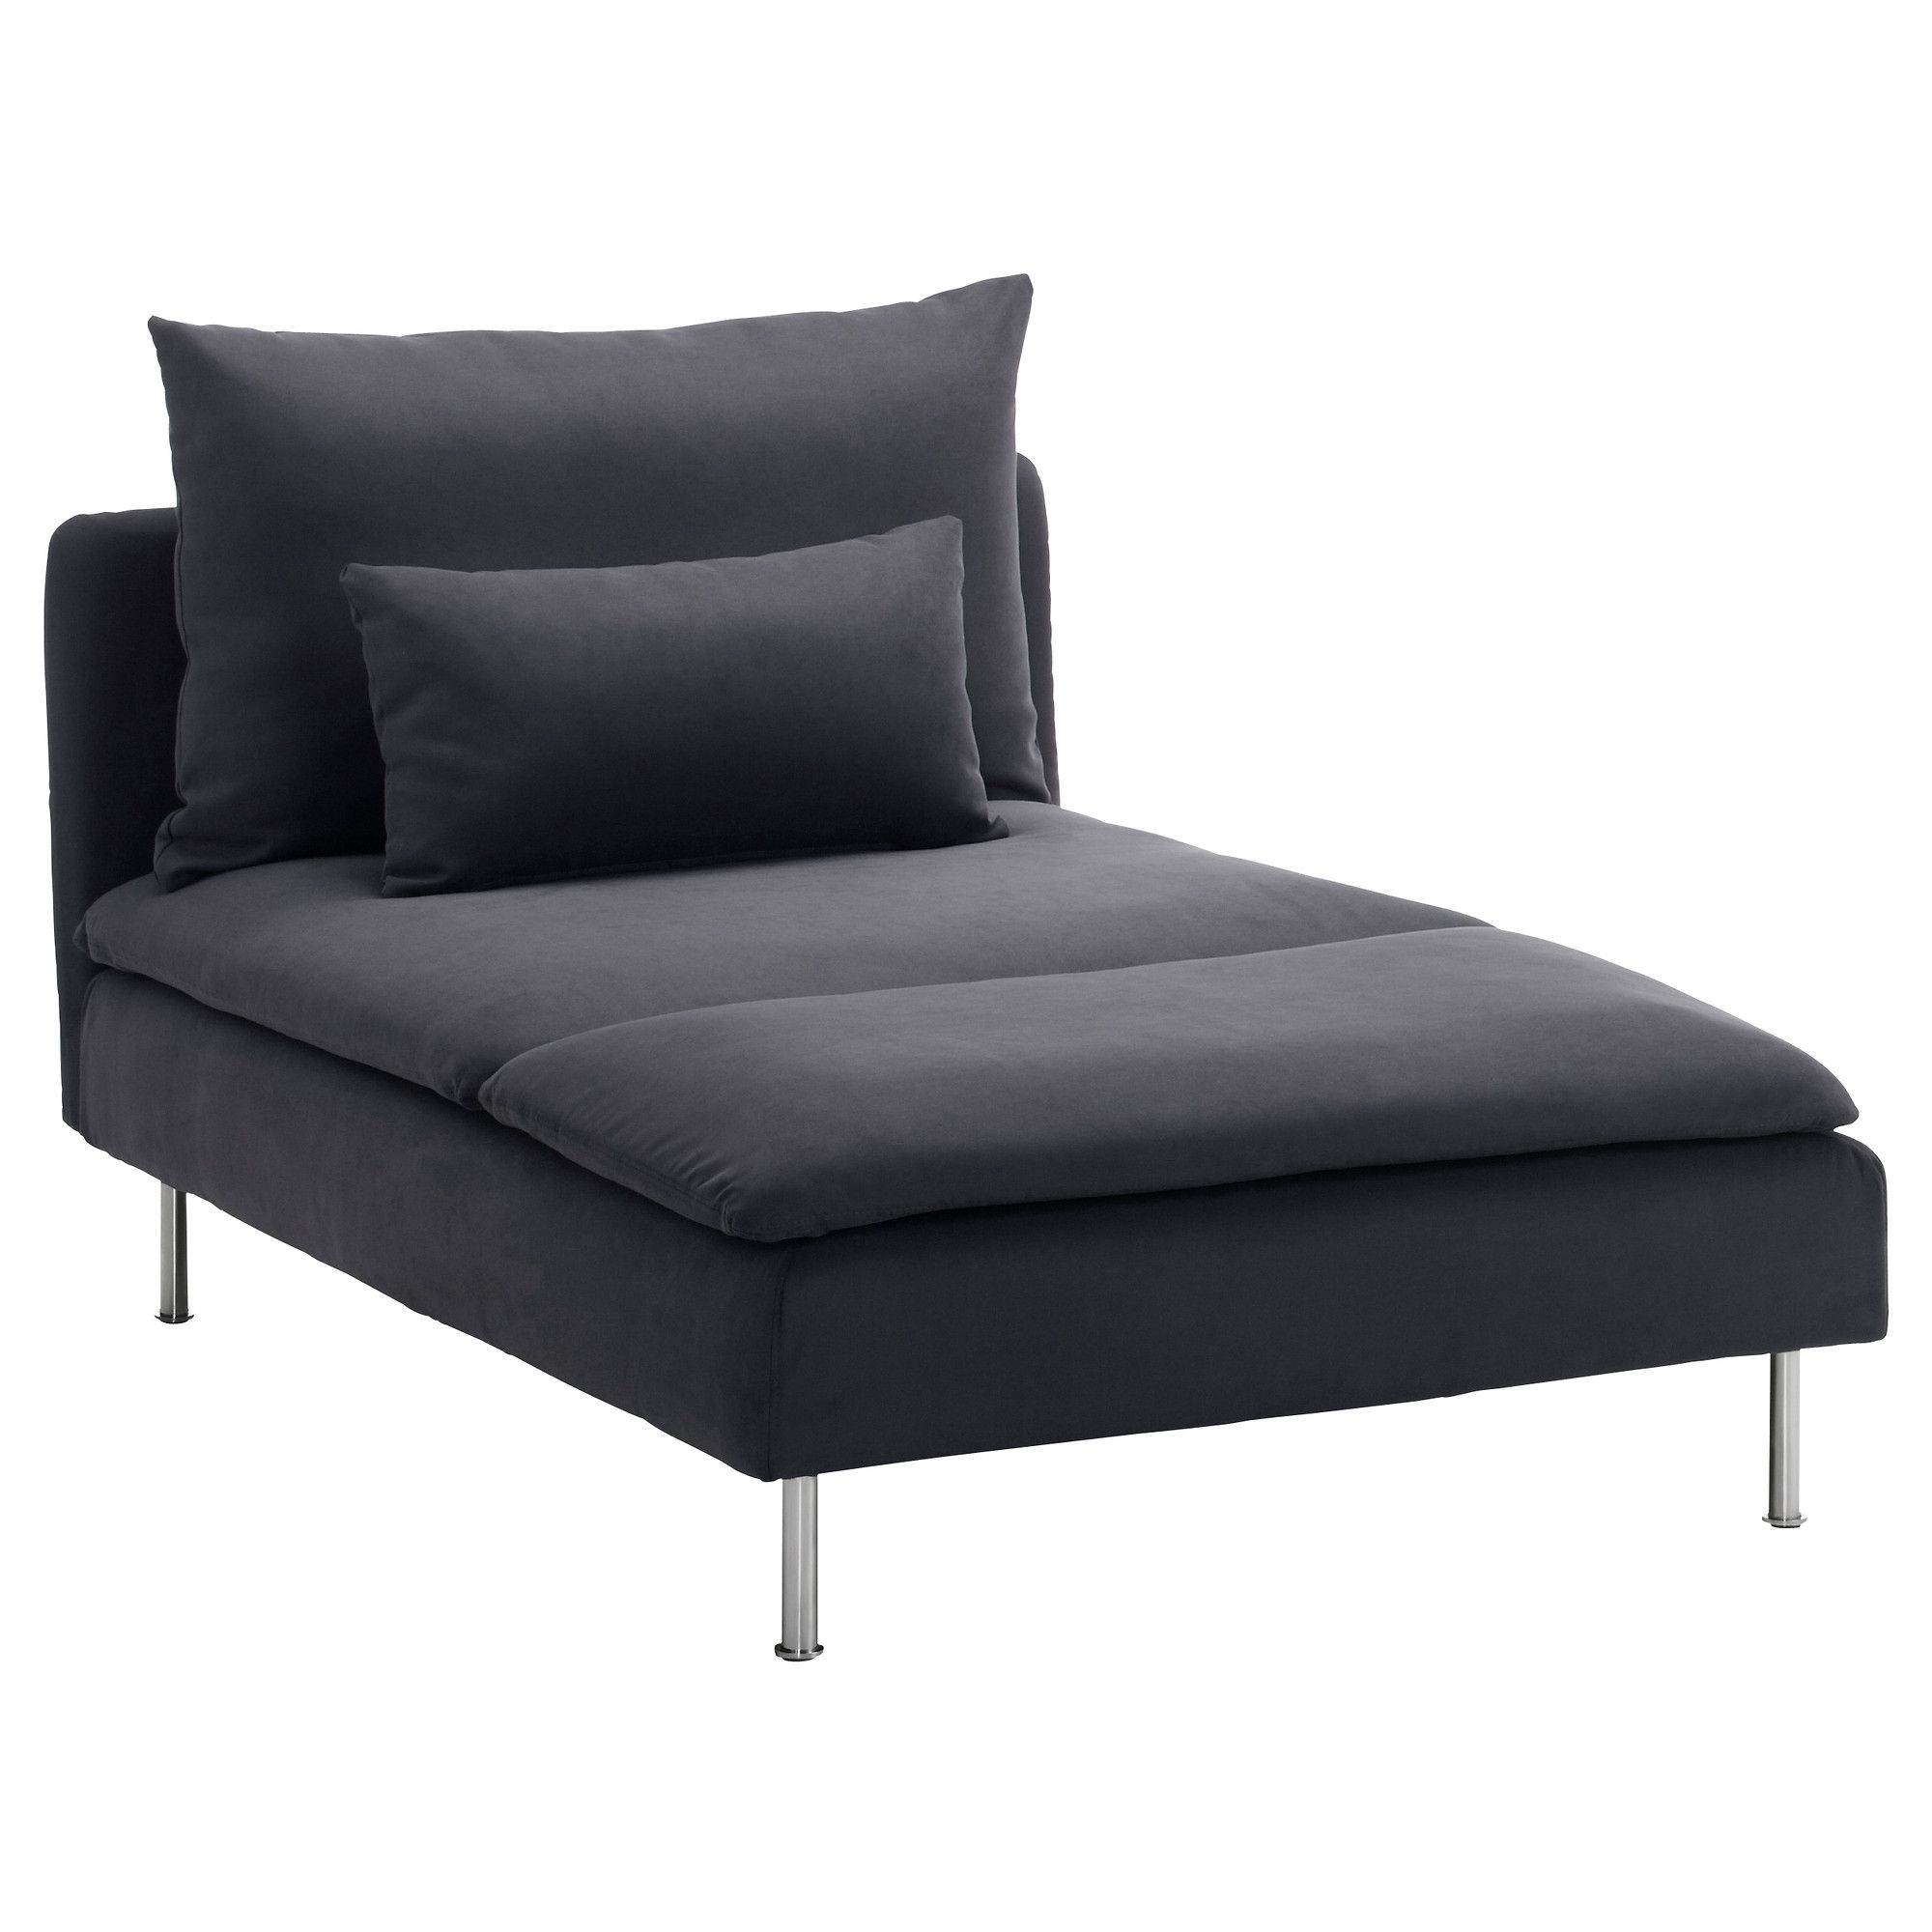 Söderhamn Chaise – Samsta Dark Gray – Ikea For Widely Used Gray Chaise Lounges (View 6 of 15)